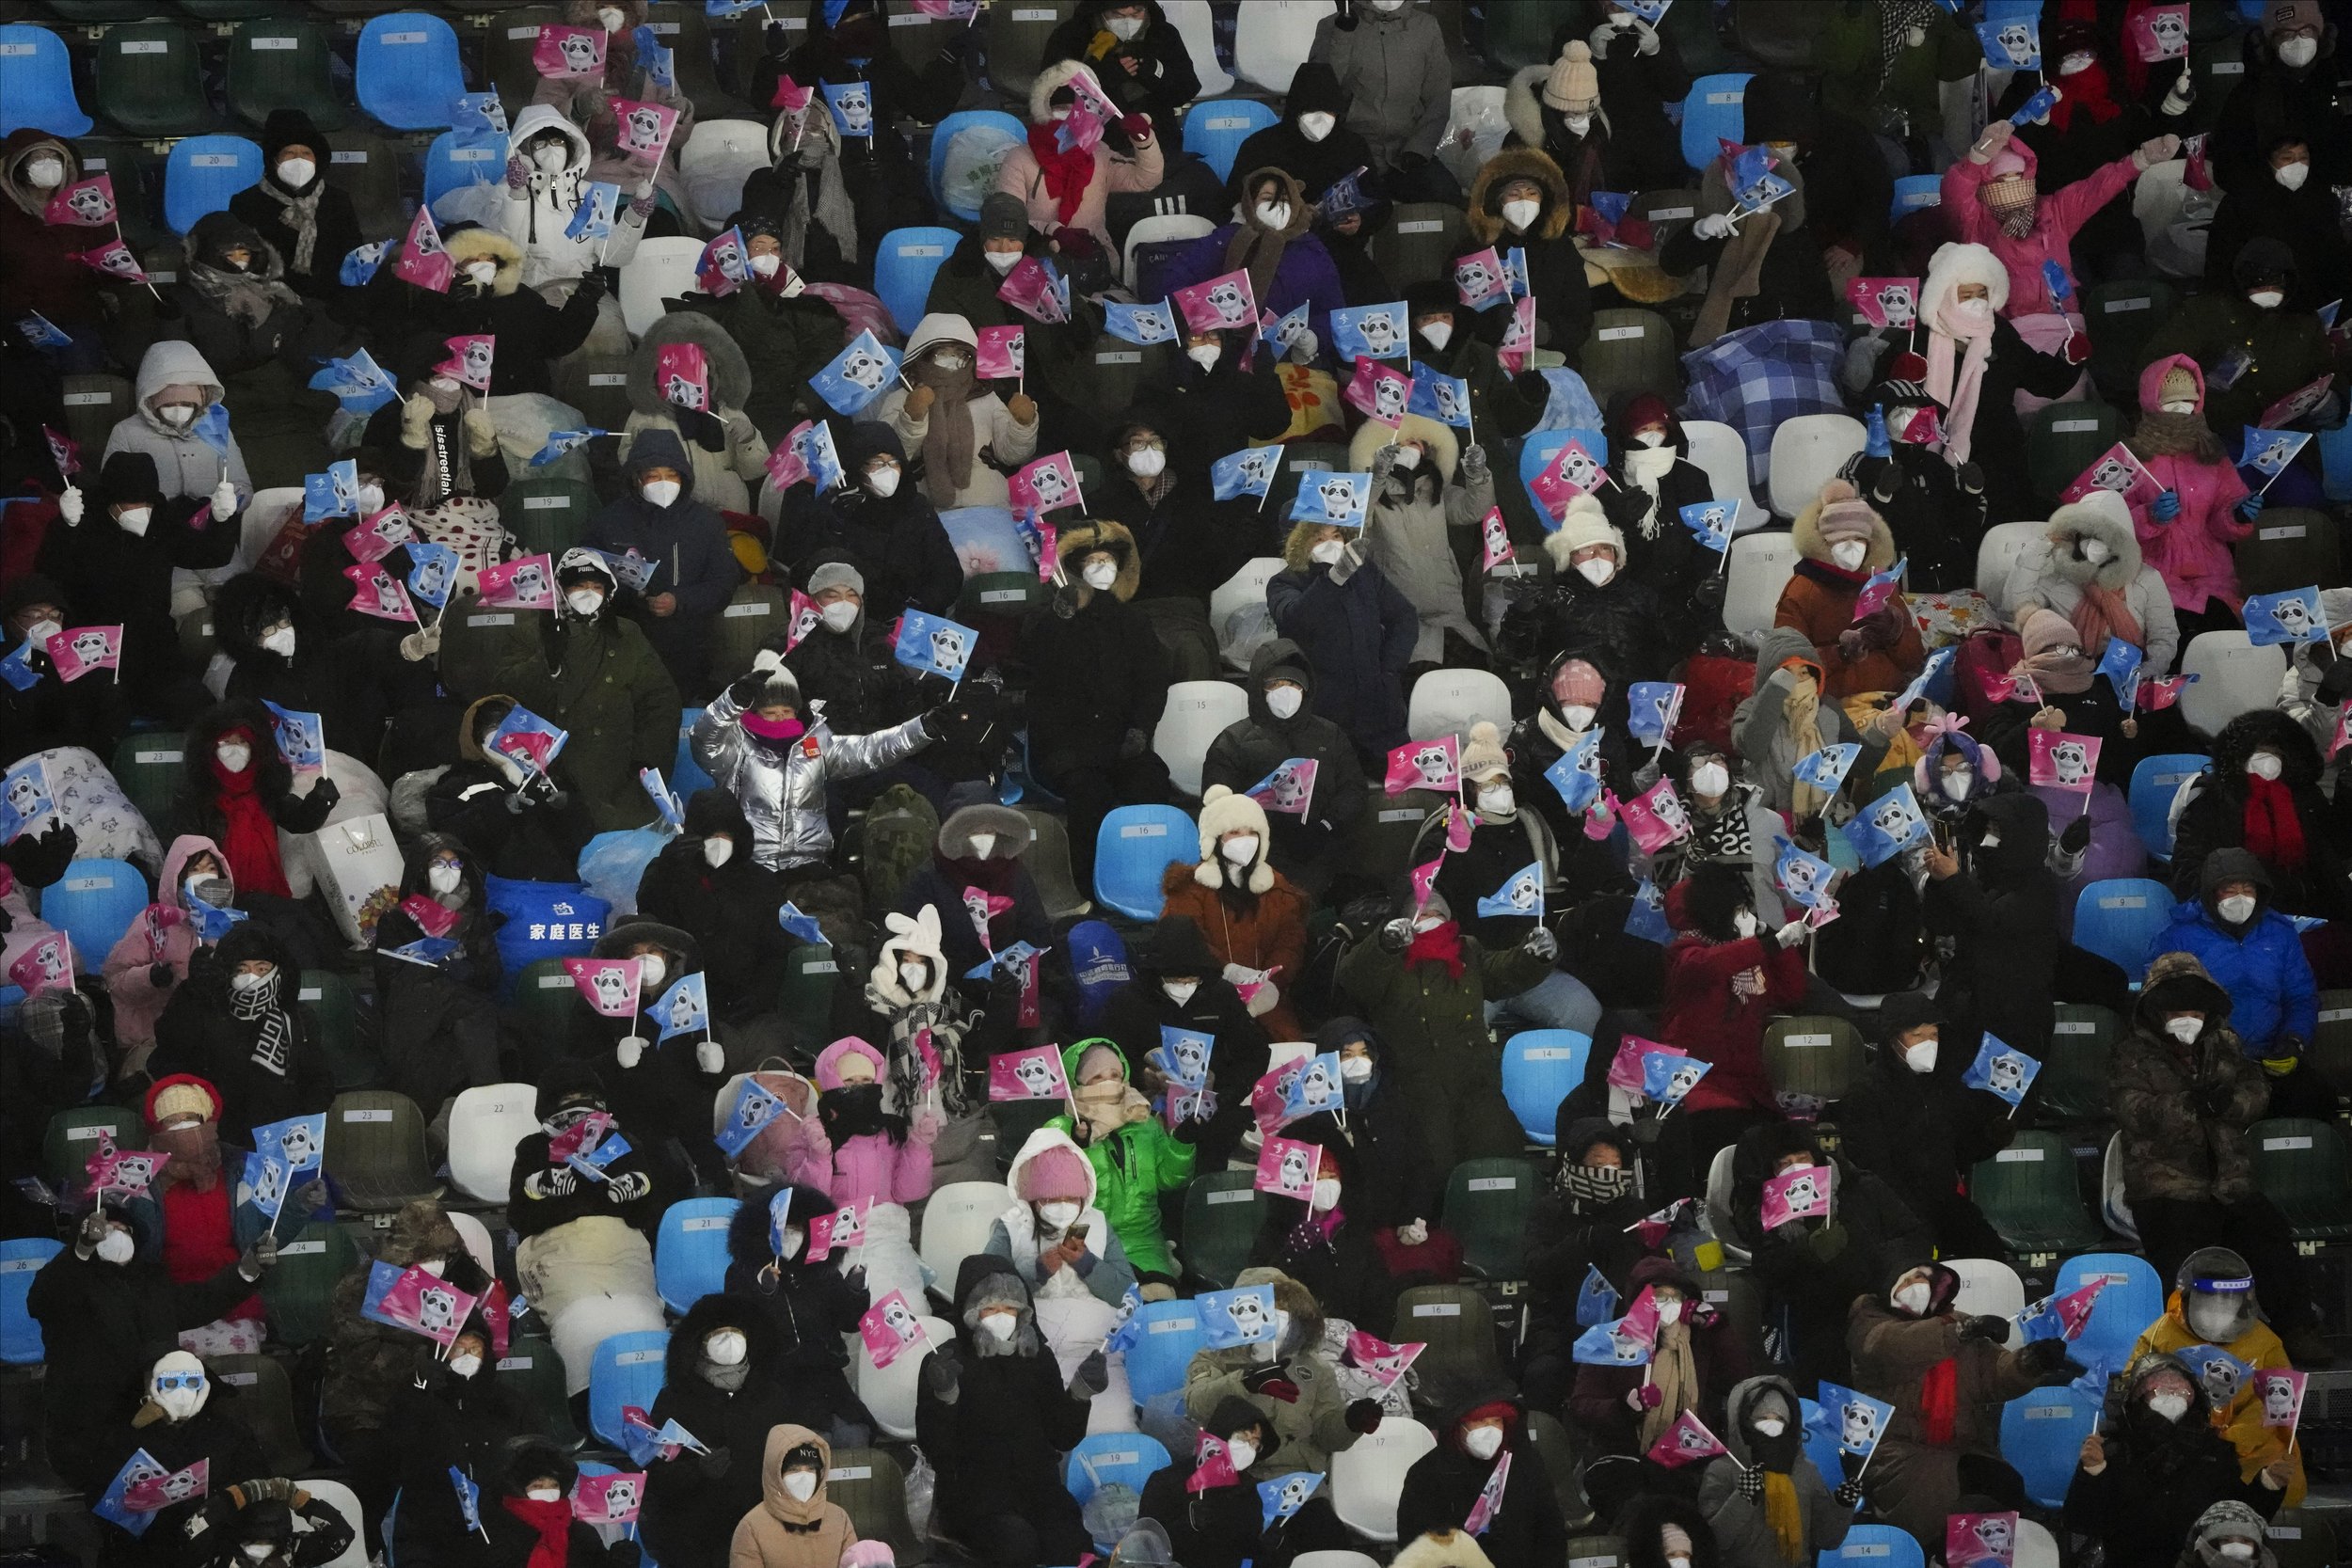  Spectators fill the stands before the women's moguls qualifying at Genting Snow Park at the 2022 Winter Olympics, Thursday, Feb. 3, 2022, in Zhangjiakou, China. (AP Photo/Lee Jin-man) 